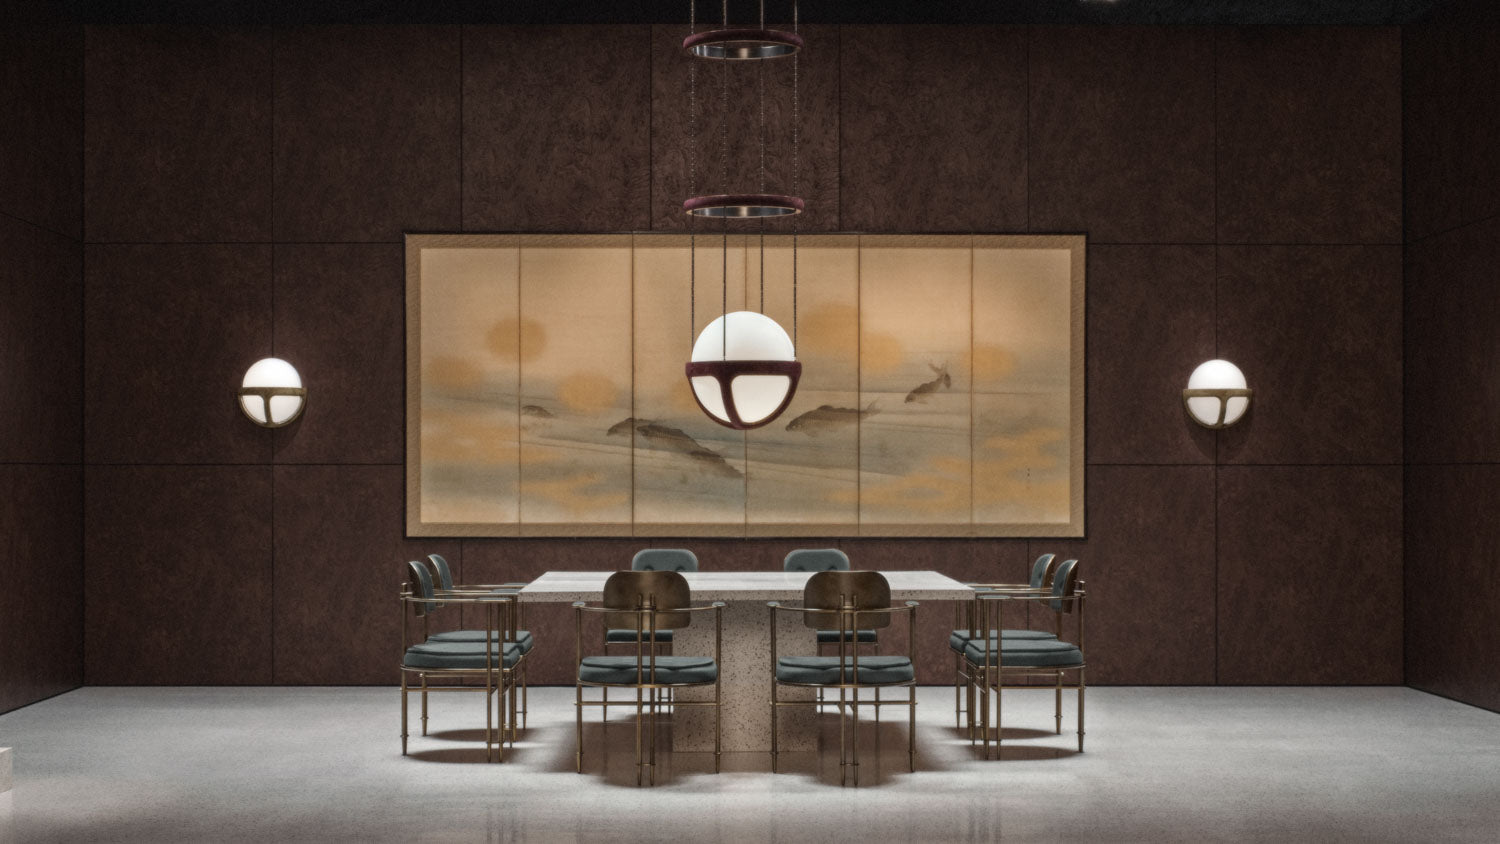 Eight EPISODE armchairs surrounding a table, with a REPRISE pendant light centered overhead and two REPRISE wall sconces. 